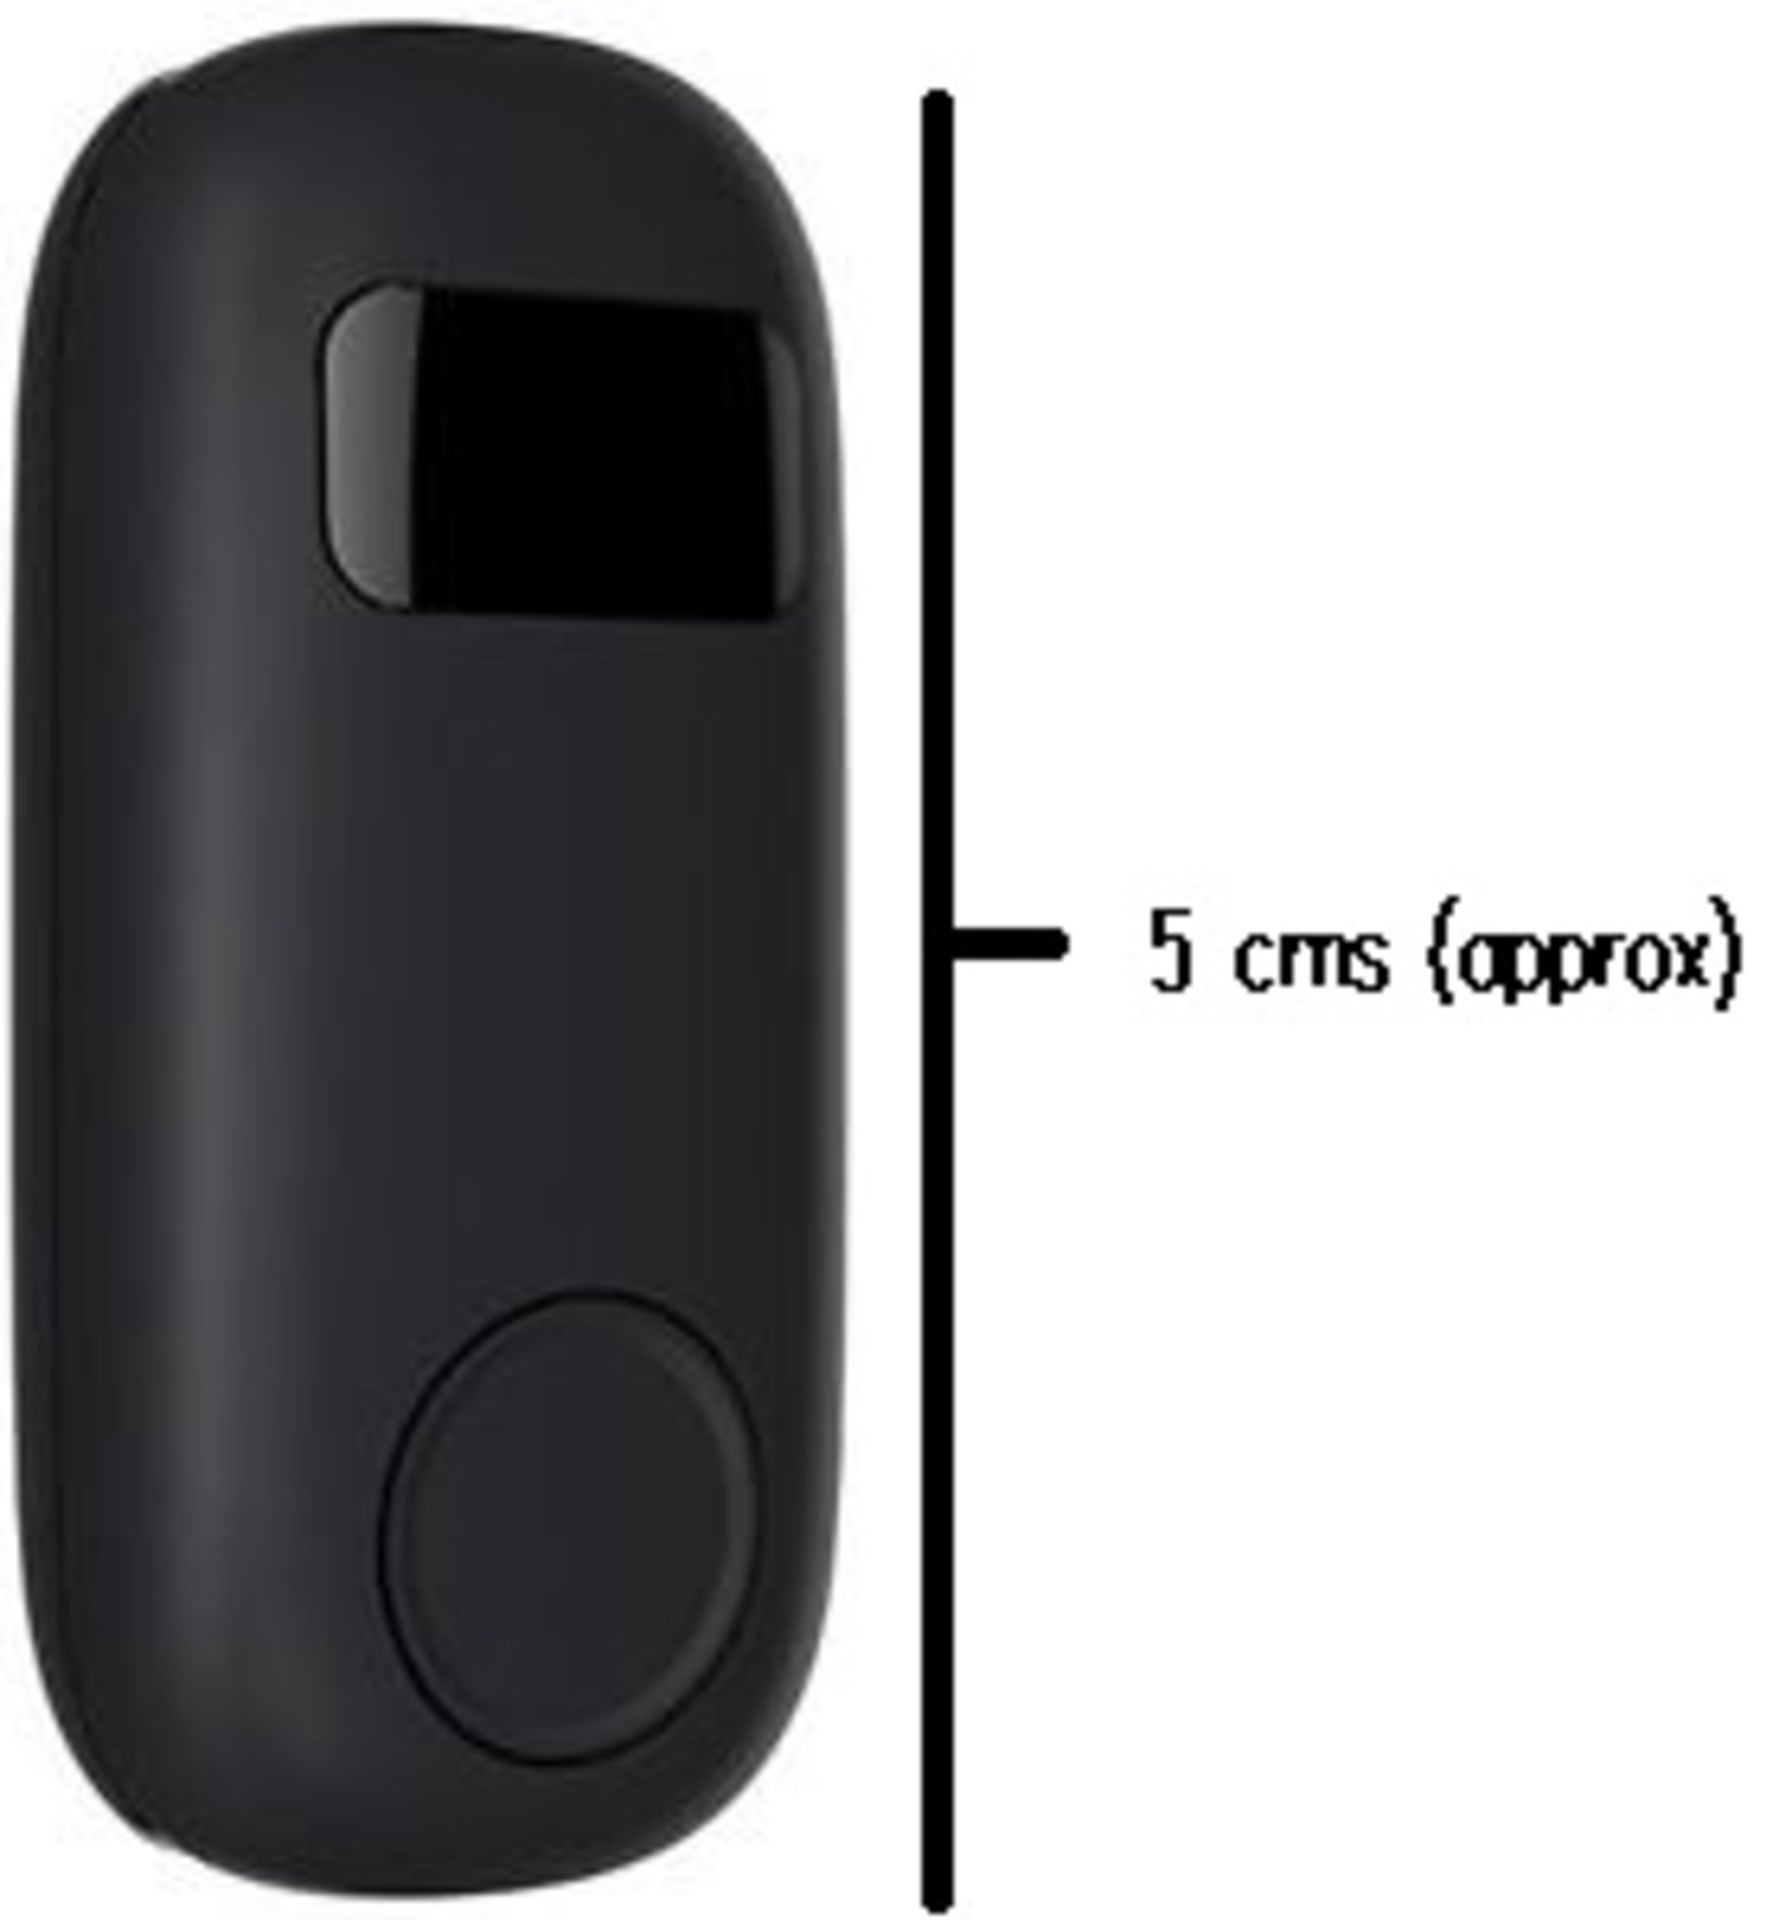 V *TRADE QTY* Brand New SonQui-Worlds Smallest GPS Tracker - With Smartphone App for iOS and Android - Bild 2 aus 2